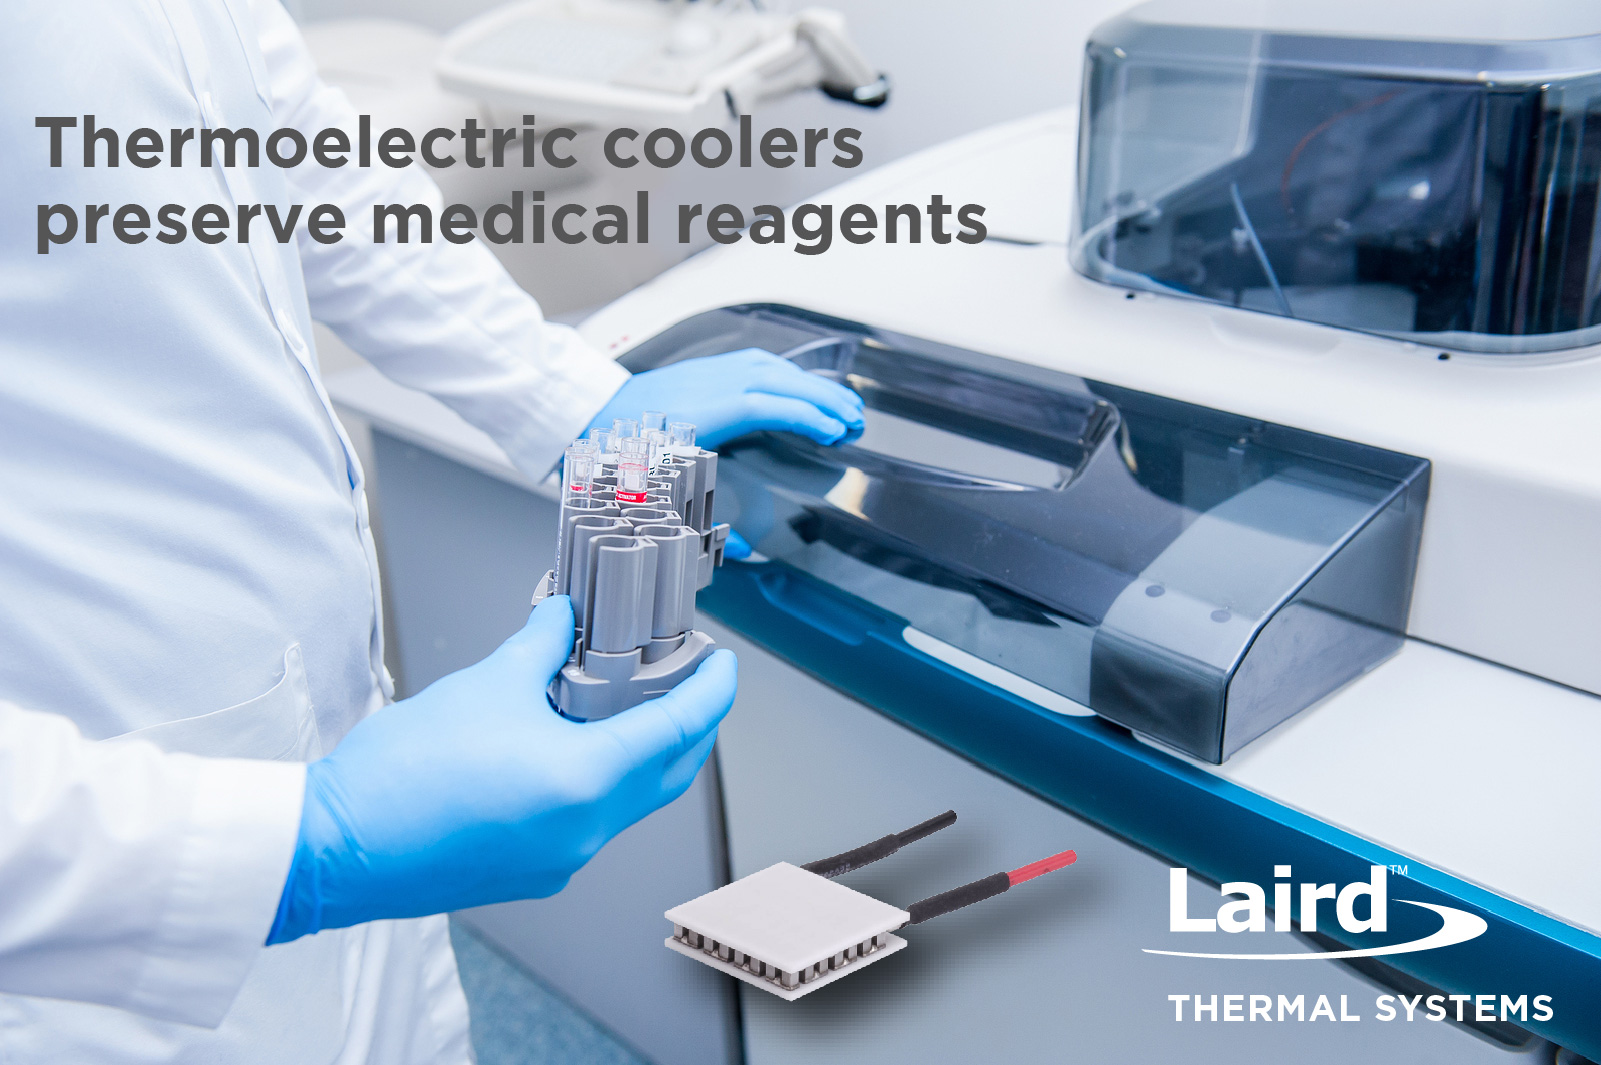 Thermoelectric coolers preserve medical reagents